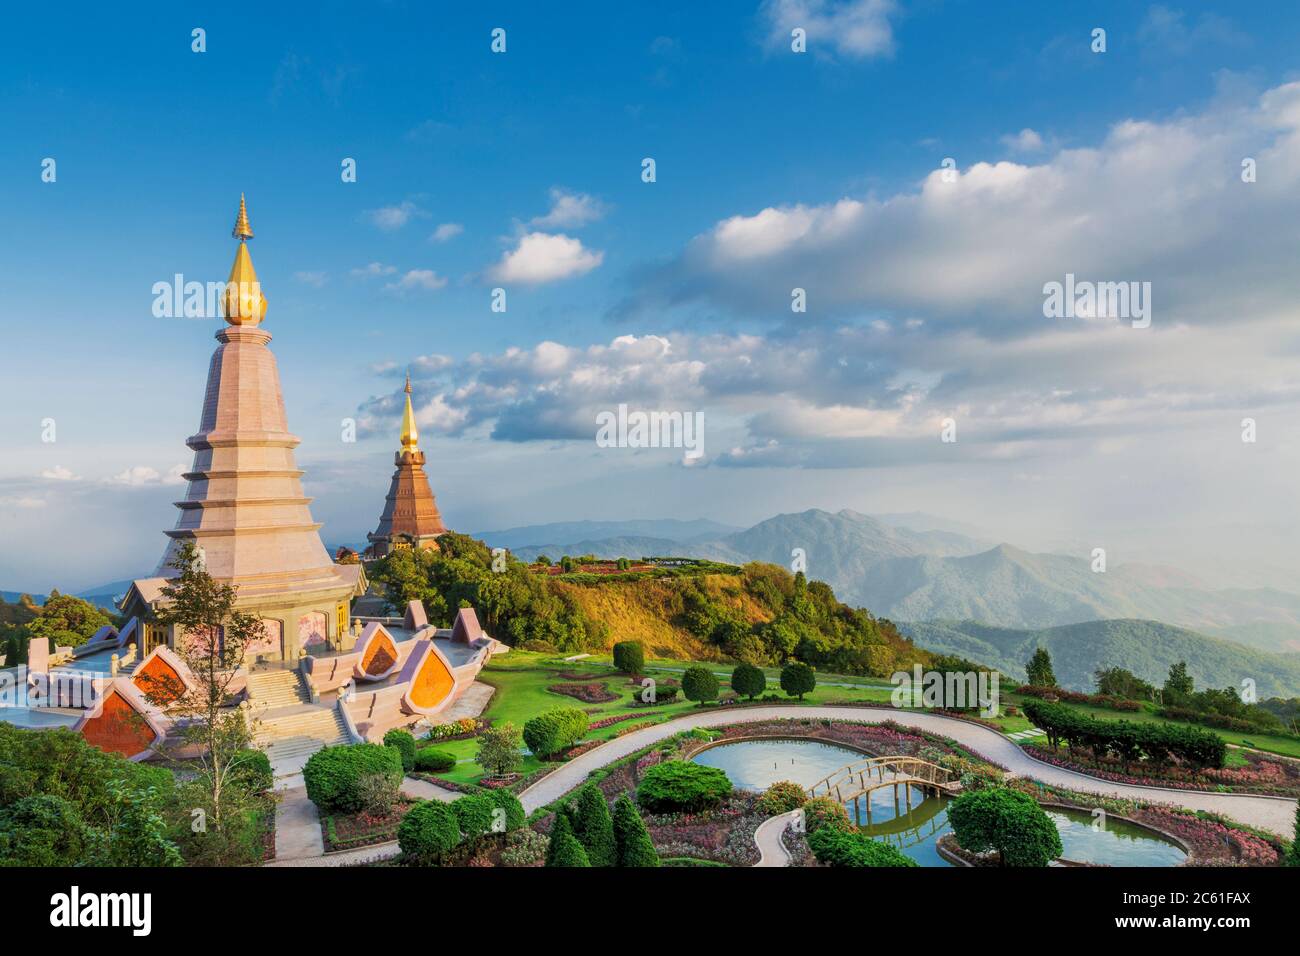 Southeast Asia, Thailand. Buddhist temple and gardens at Doi Inthanon near Chiang Mai Stock Photo